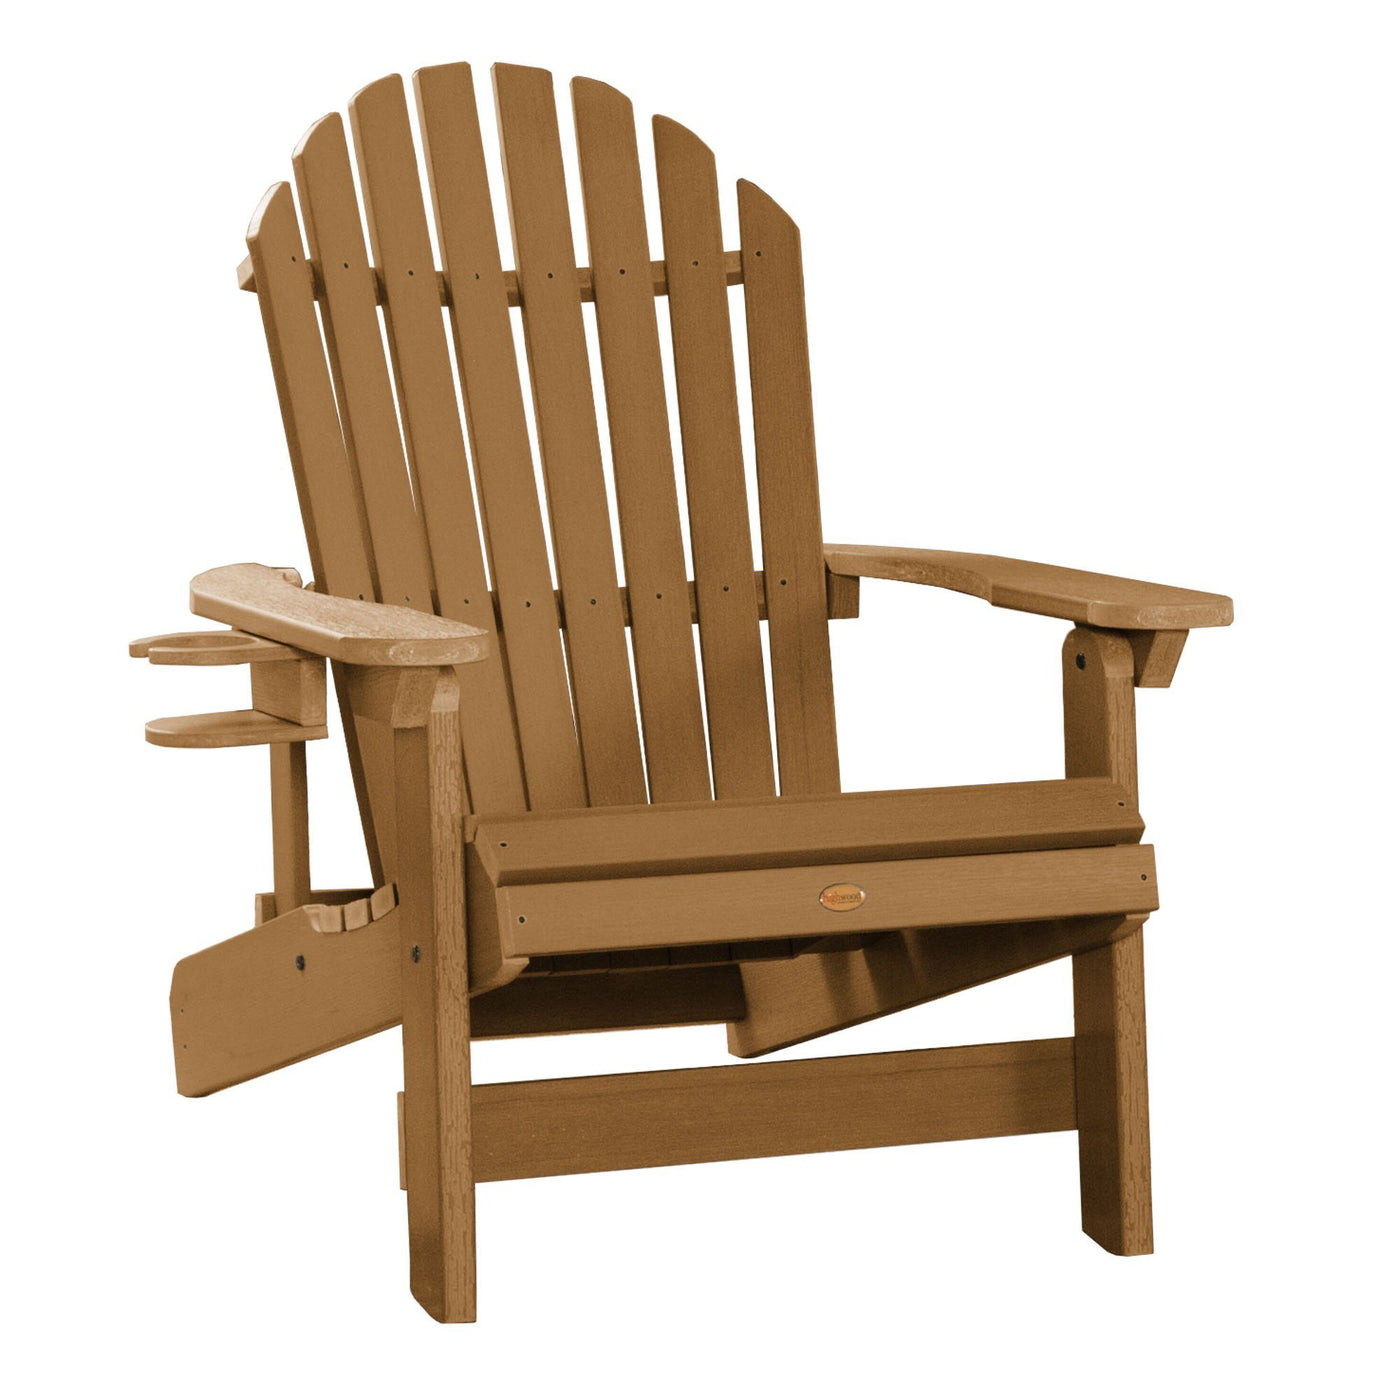 1 King Hamilton Folding and Reclining Adirondack Chair with 1 Easy-add Cup Holder Highwood USA Toffee 